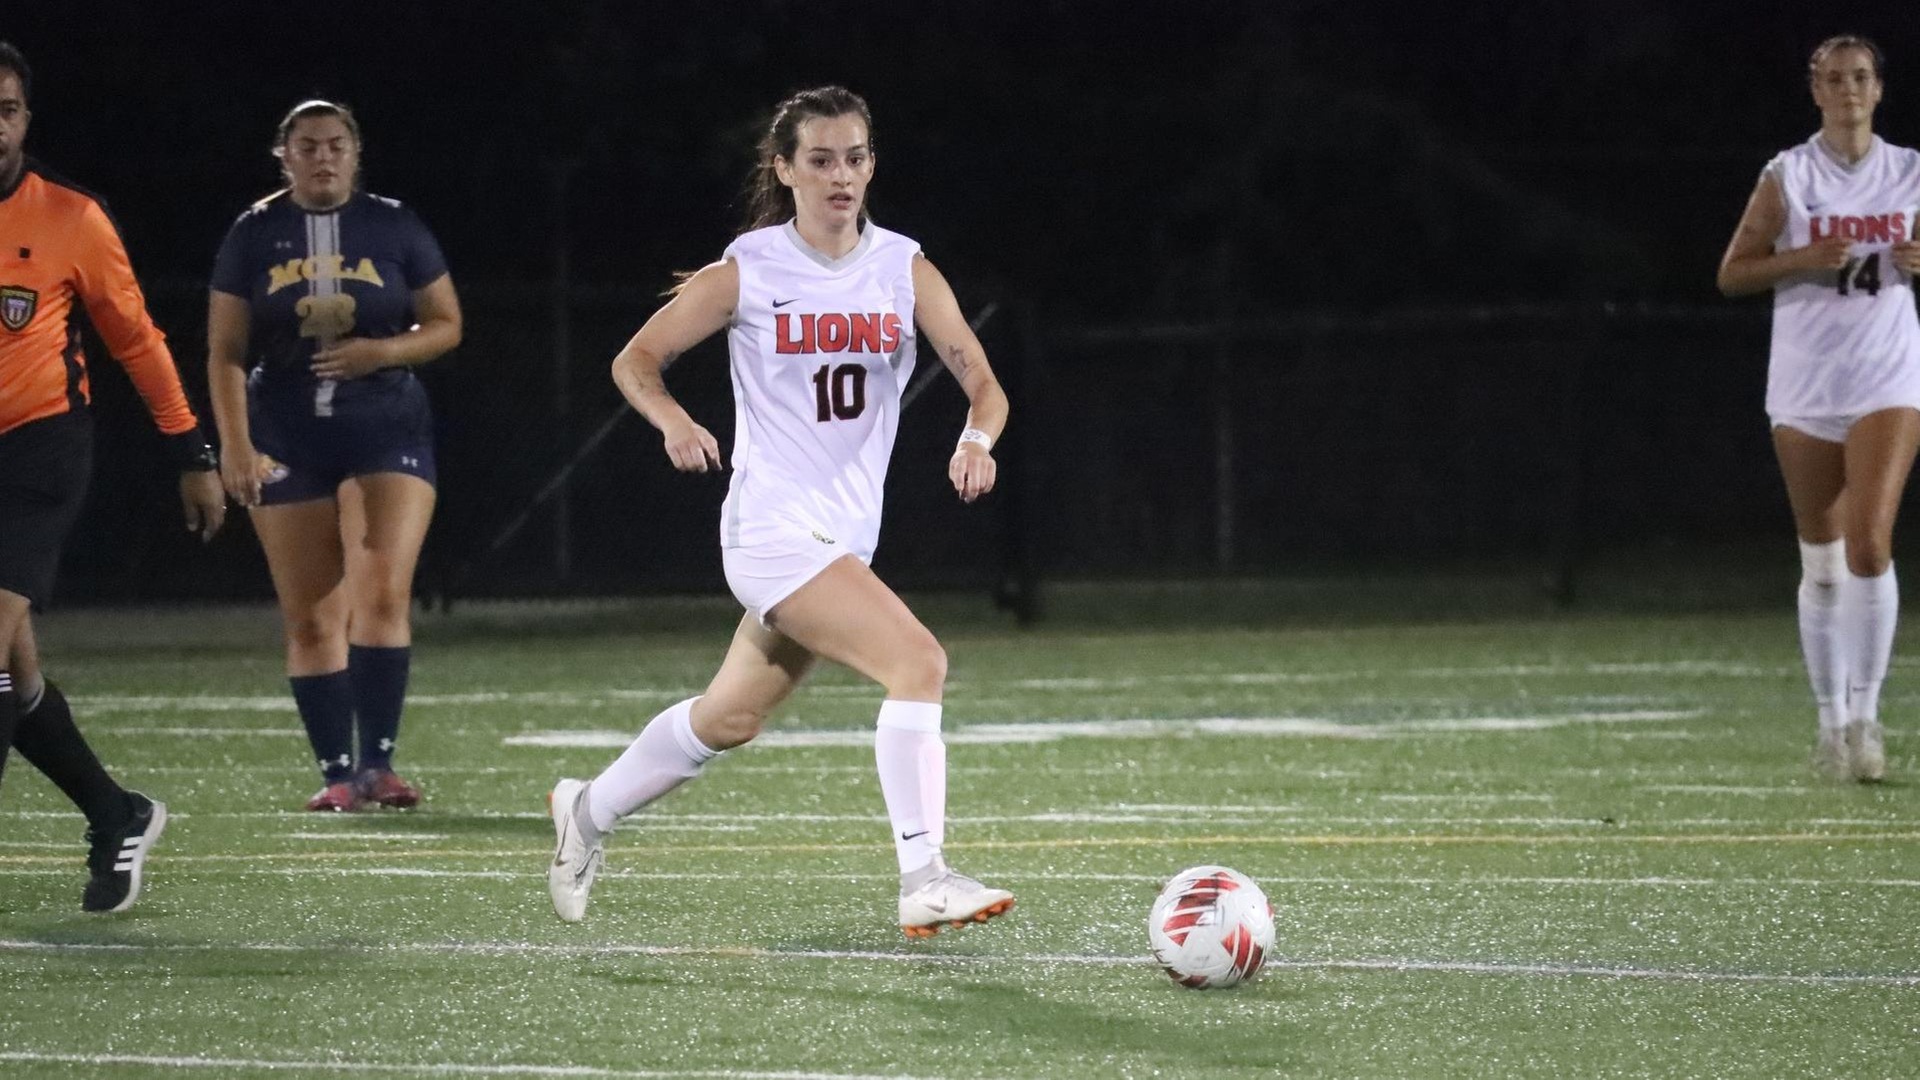 Women’s Soccer Registers 1-1 Draw at SUNY Canton